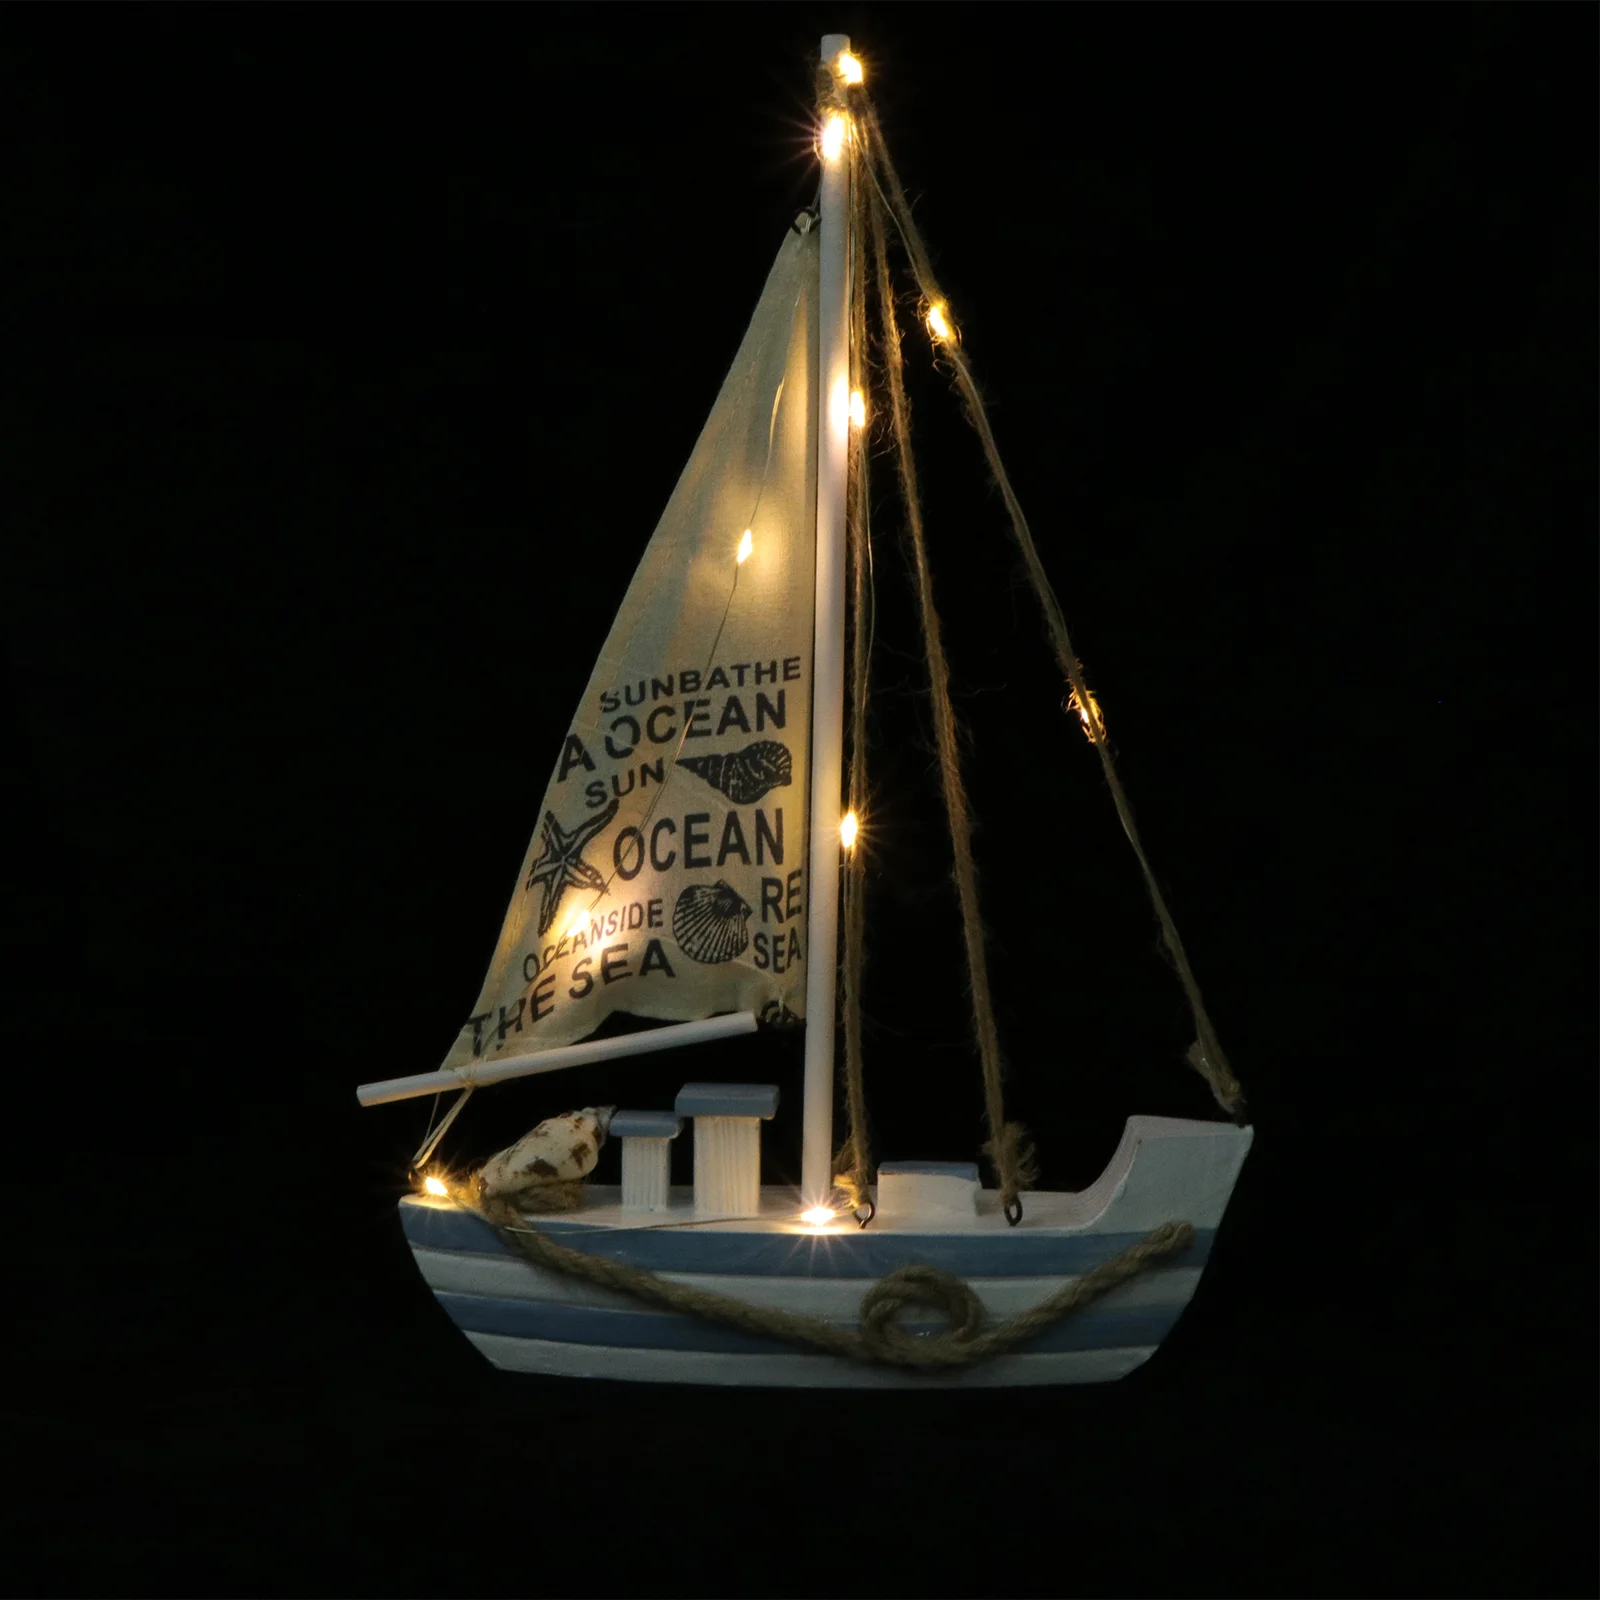 

Nautical Wooden Sailboat Statue Light Model LED Beach Vintage Wood Sailing Beach Kitchen Bathroom Office Party Centrepiece